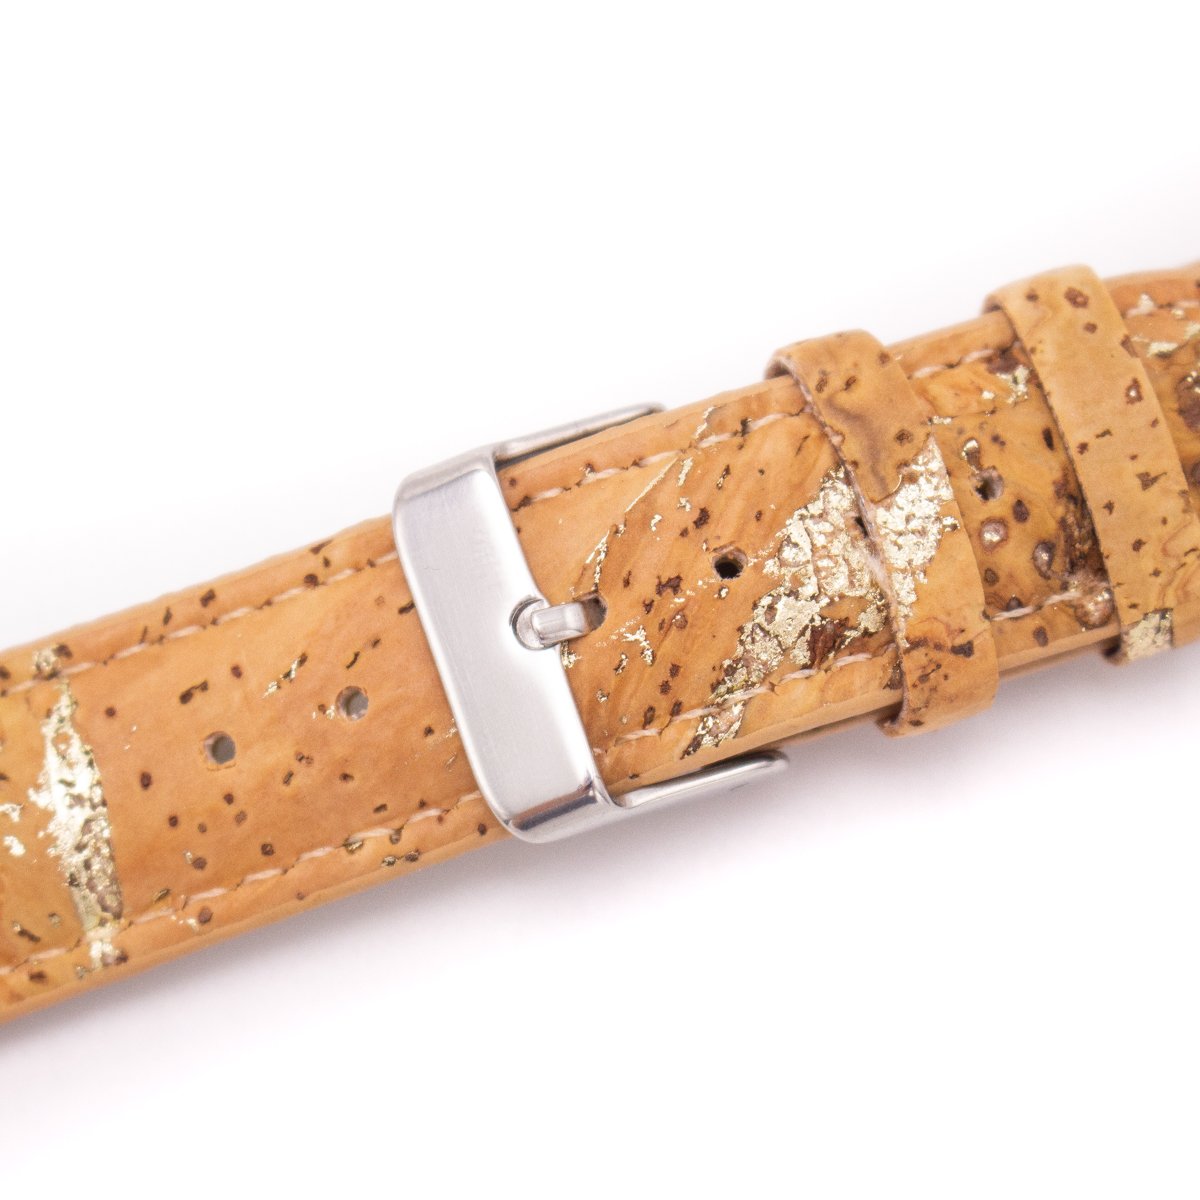 Natural with Gold Cork Watch Strap 18mm 20mm E-013